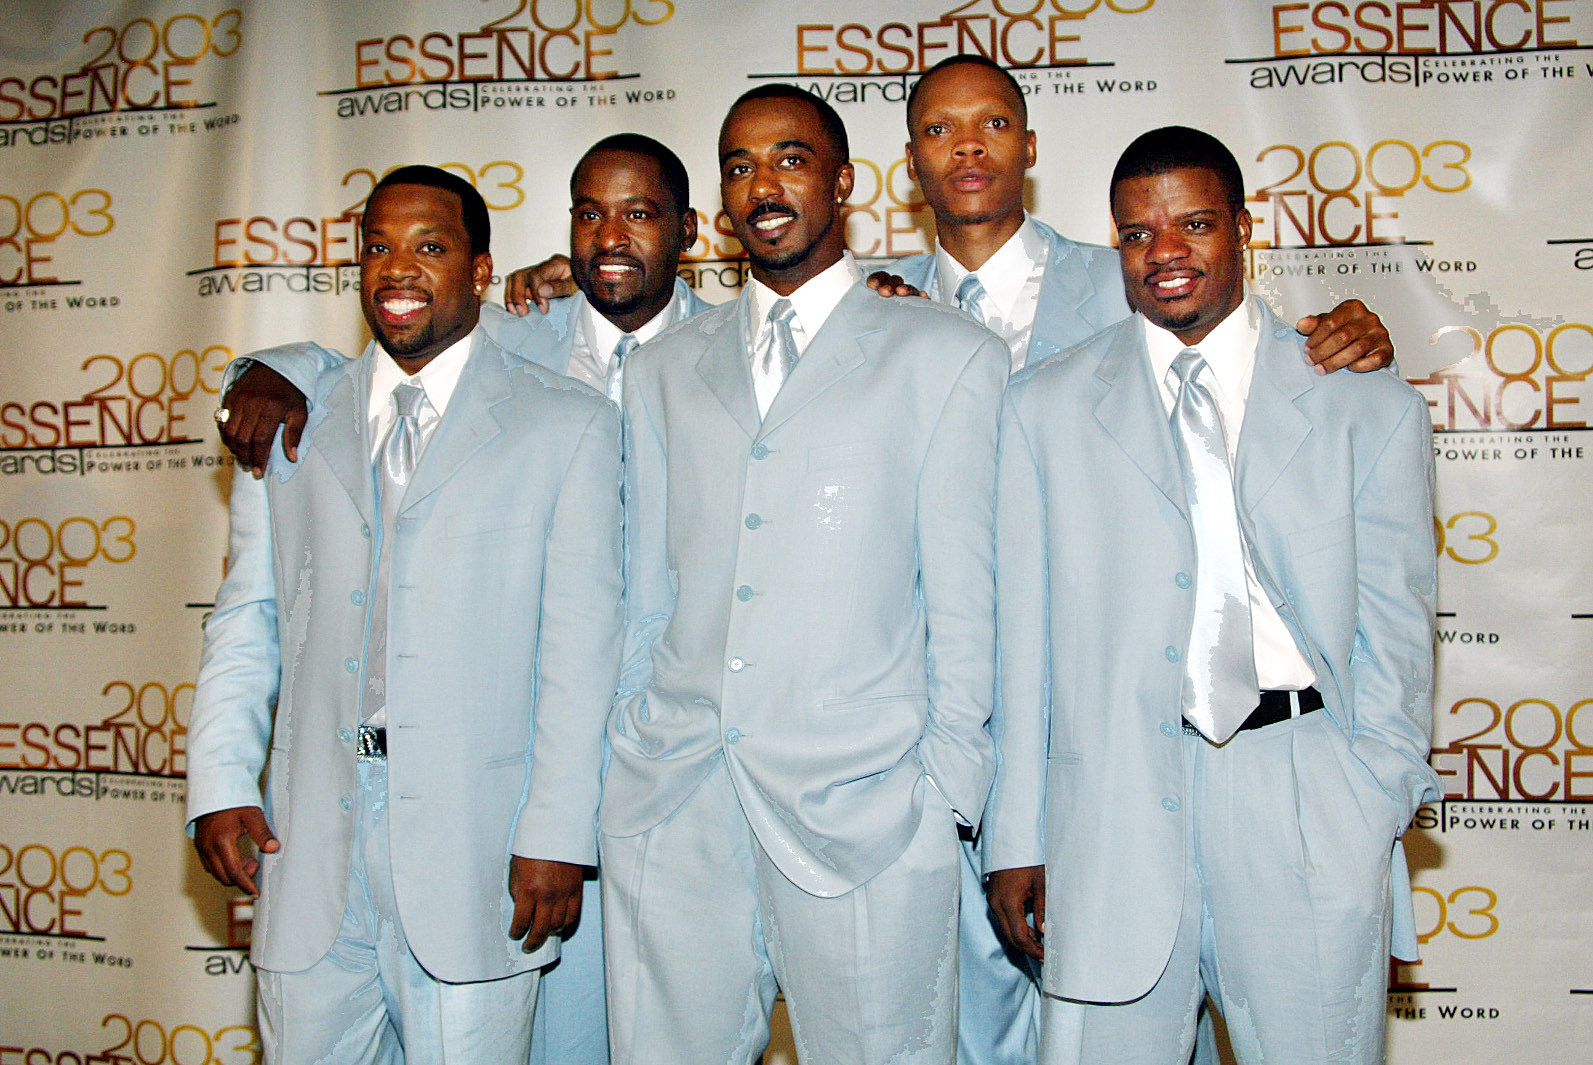 Jimmy Jam & Terry Lewis, Babyface Sign on as Music Producers for New Edition Biopic1593 x 1065